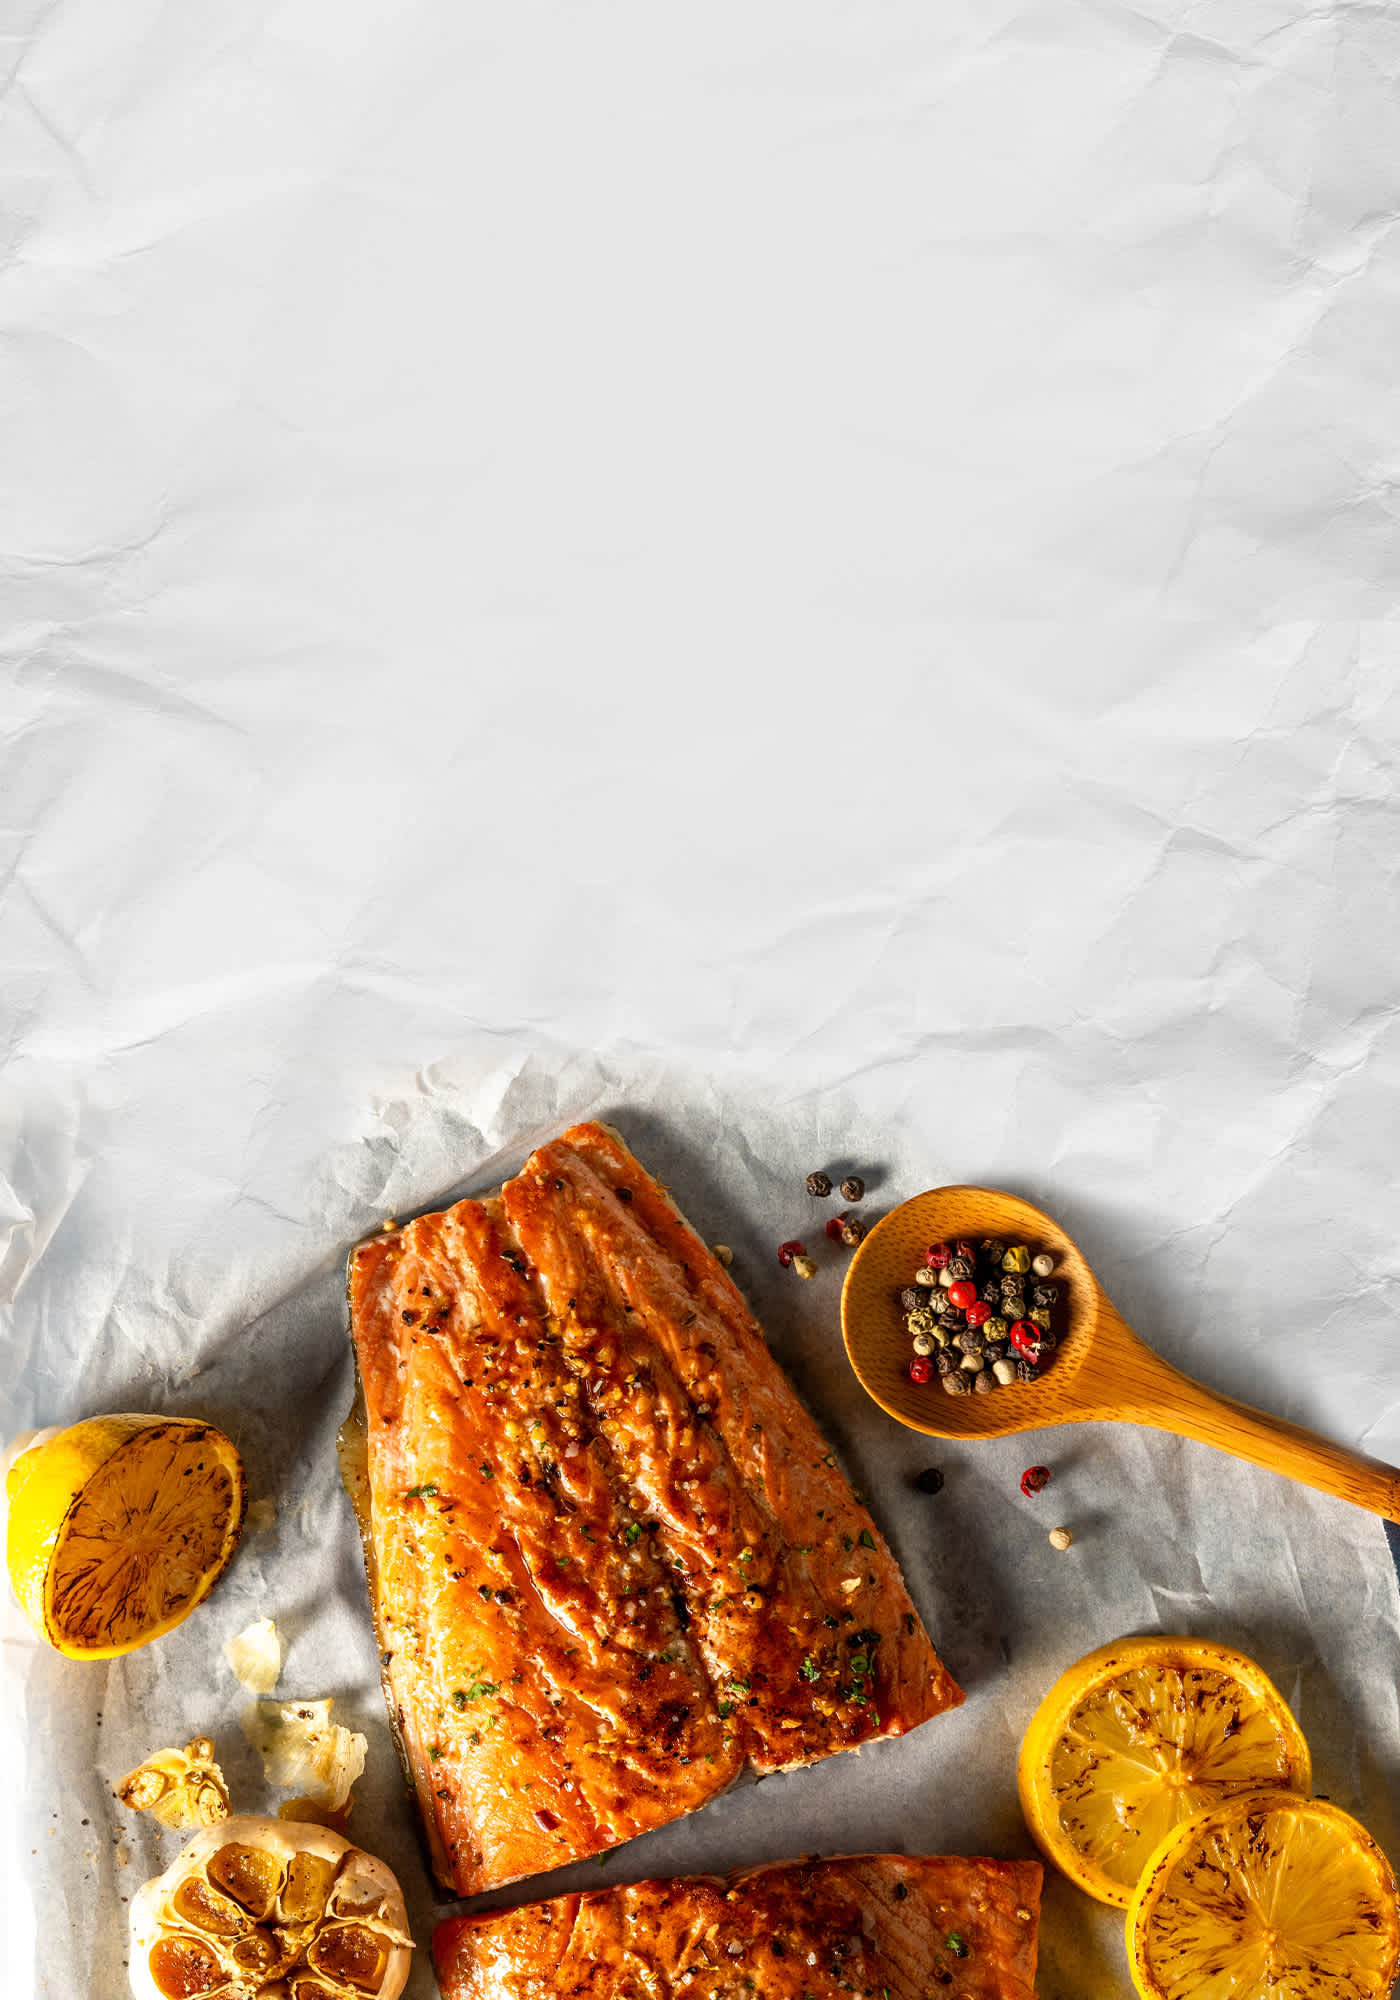 Cooked salmon on a white background